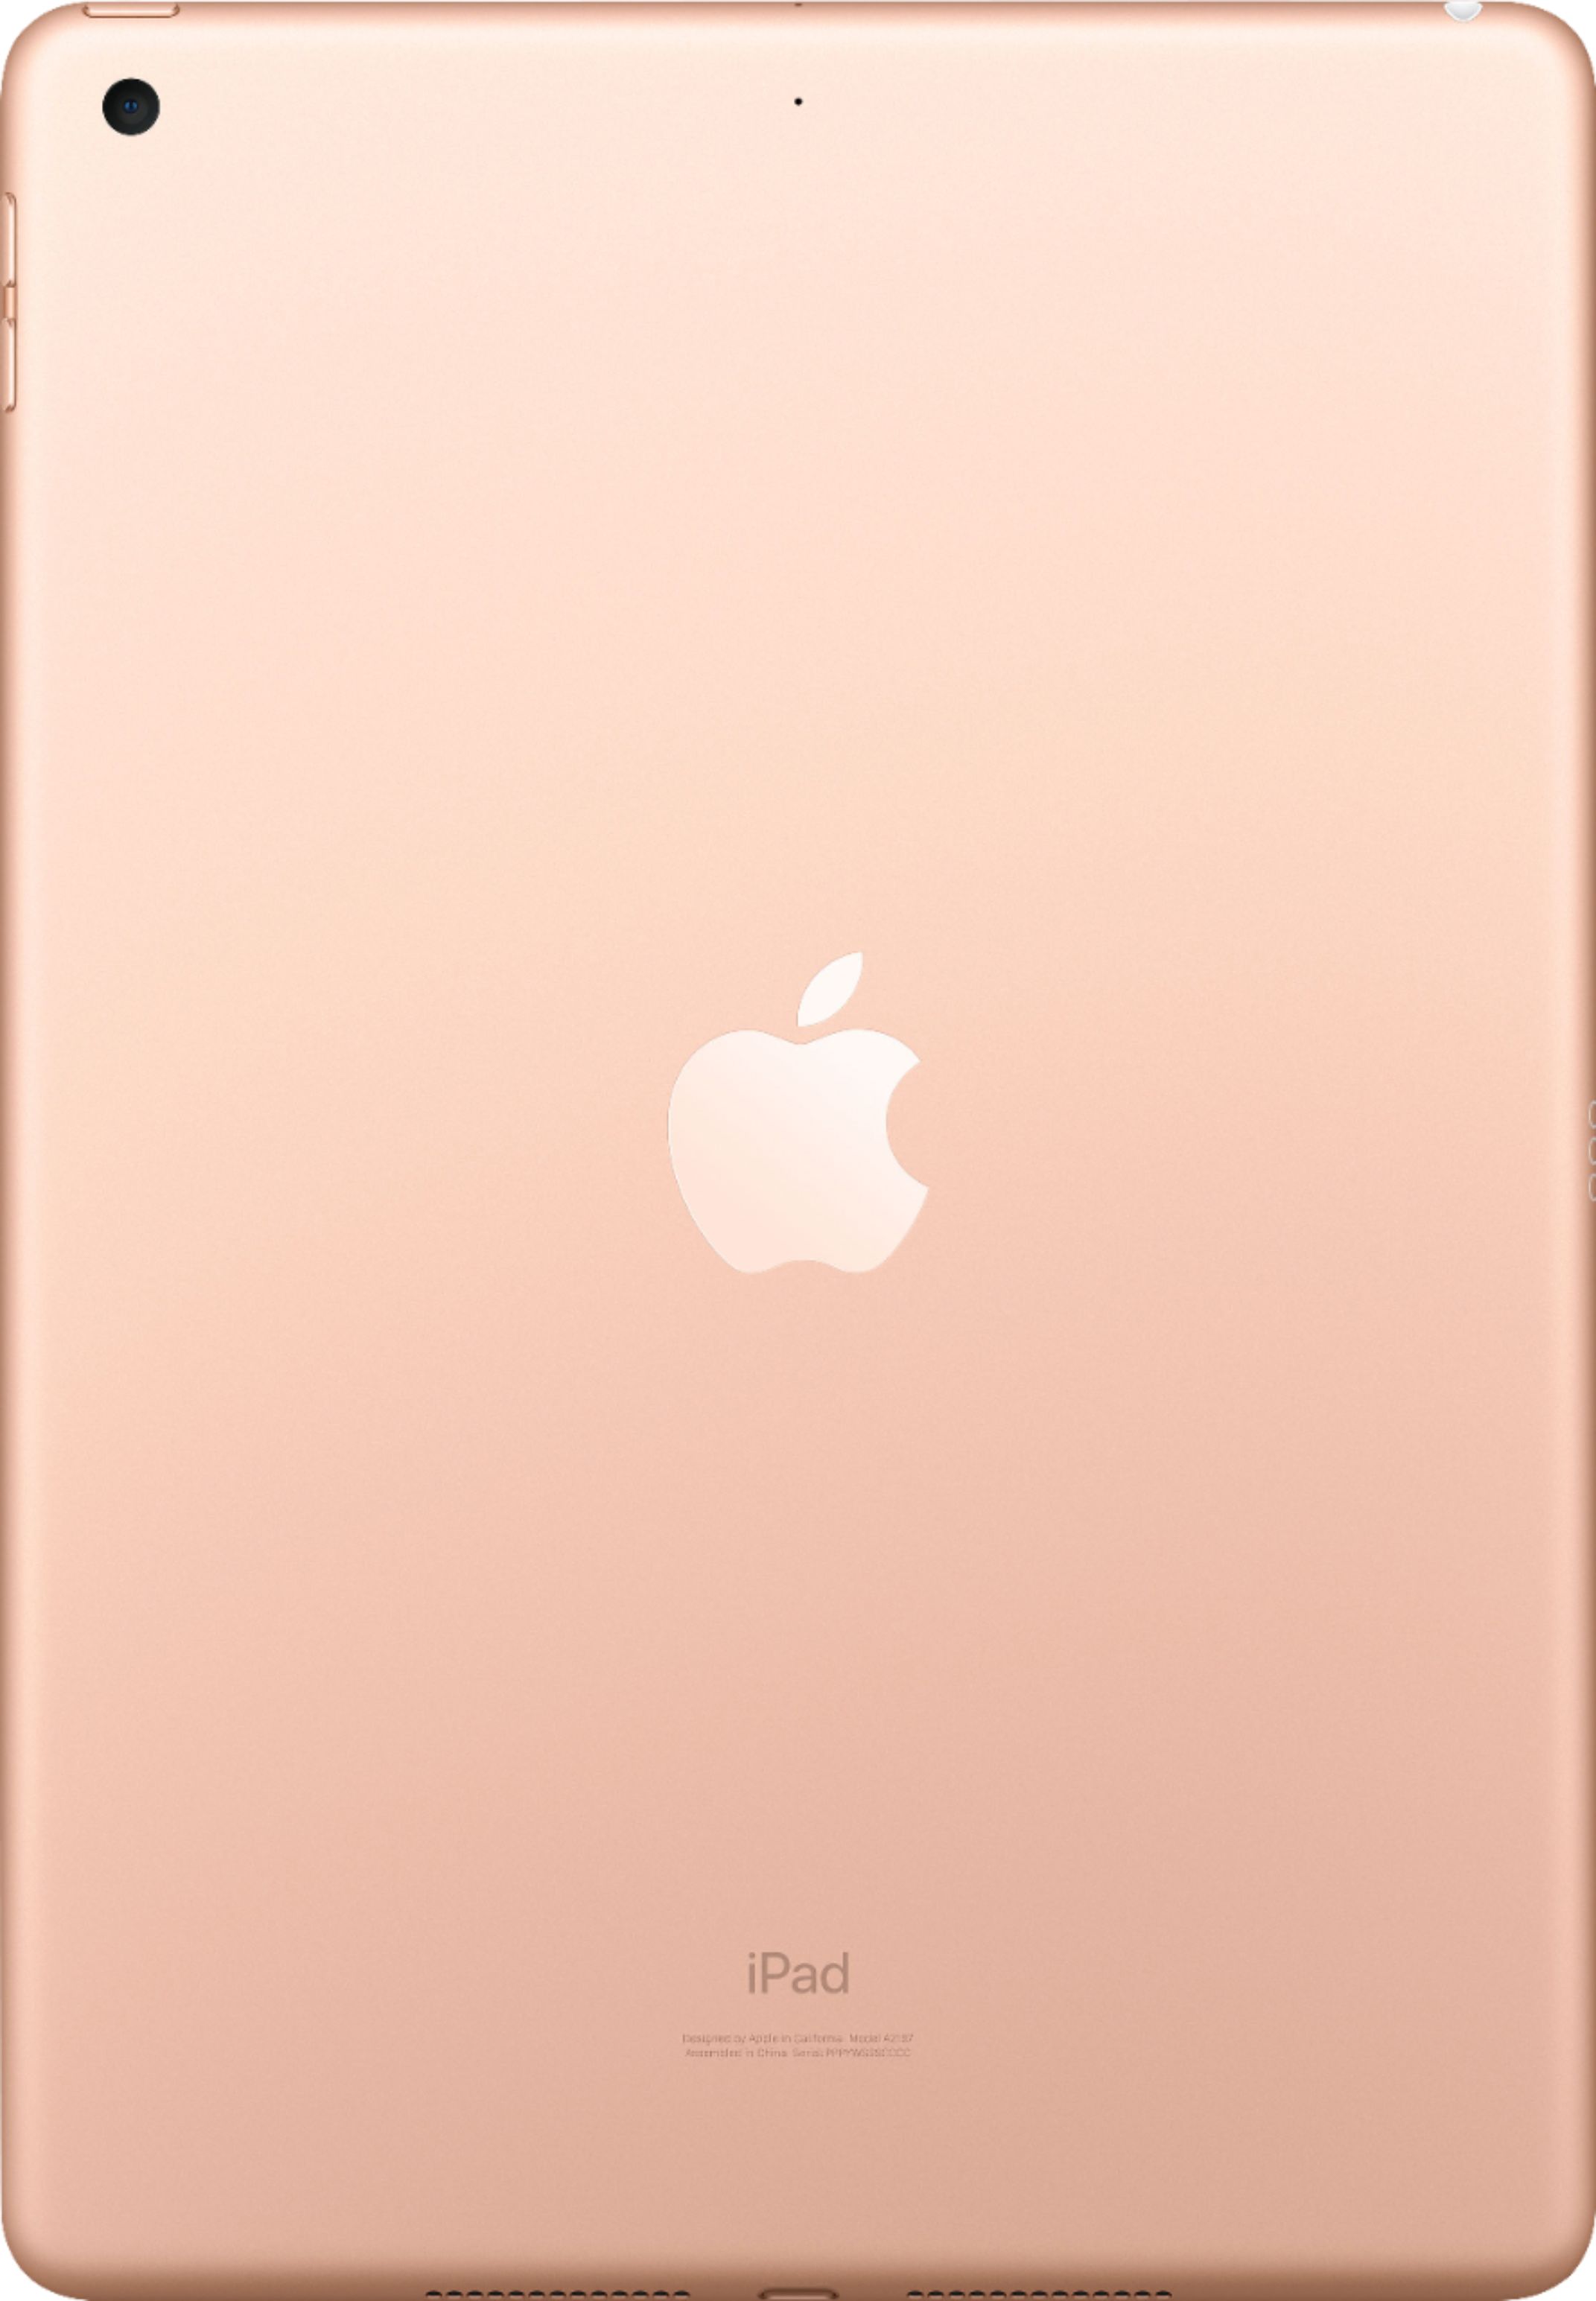 Back View: Apple - 10.2-Inch iPad (Latest Model) with Wi-Fi + Cellular - 64GB - Space Gray (AT&T)